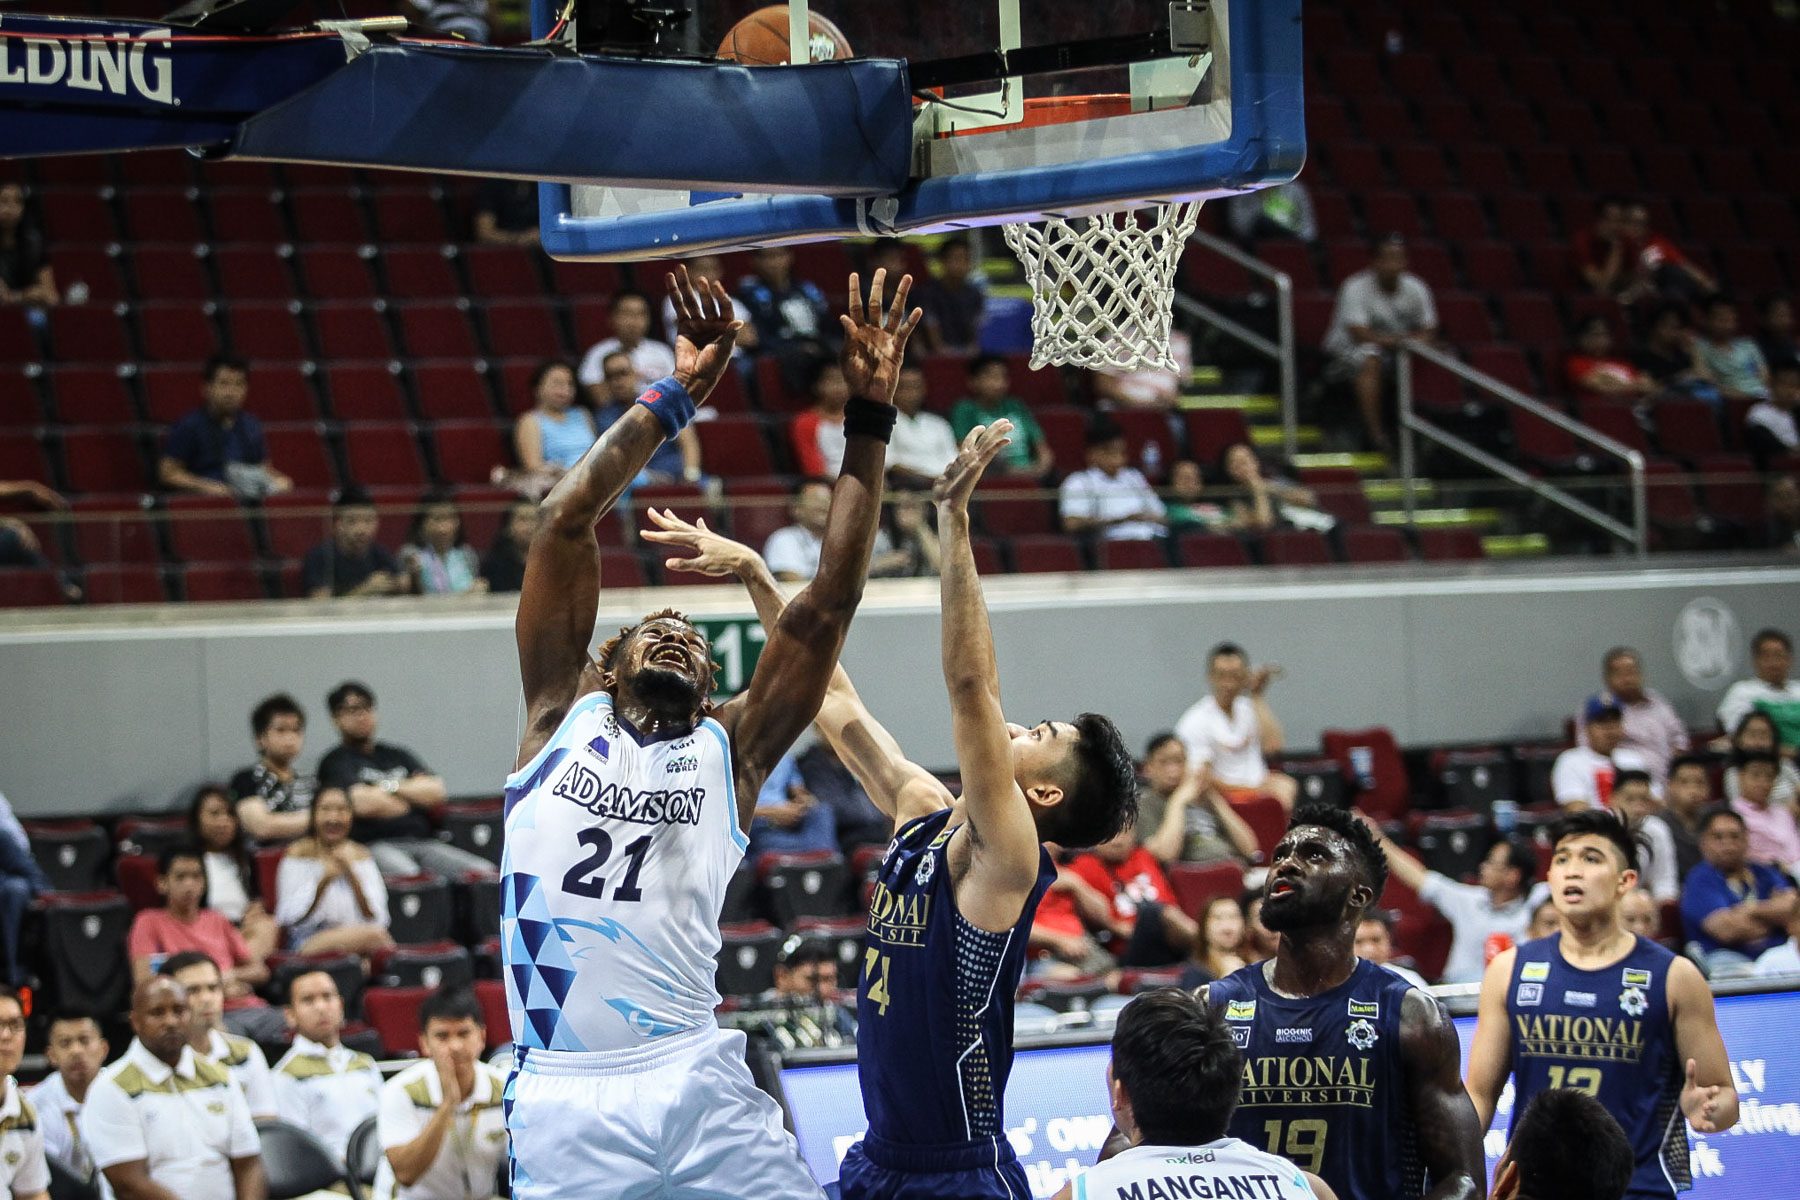 Adamson improves to 3-1 after taking down NU